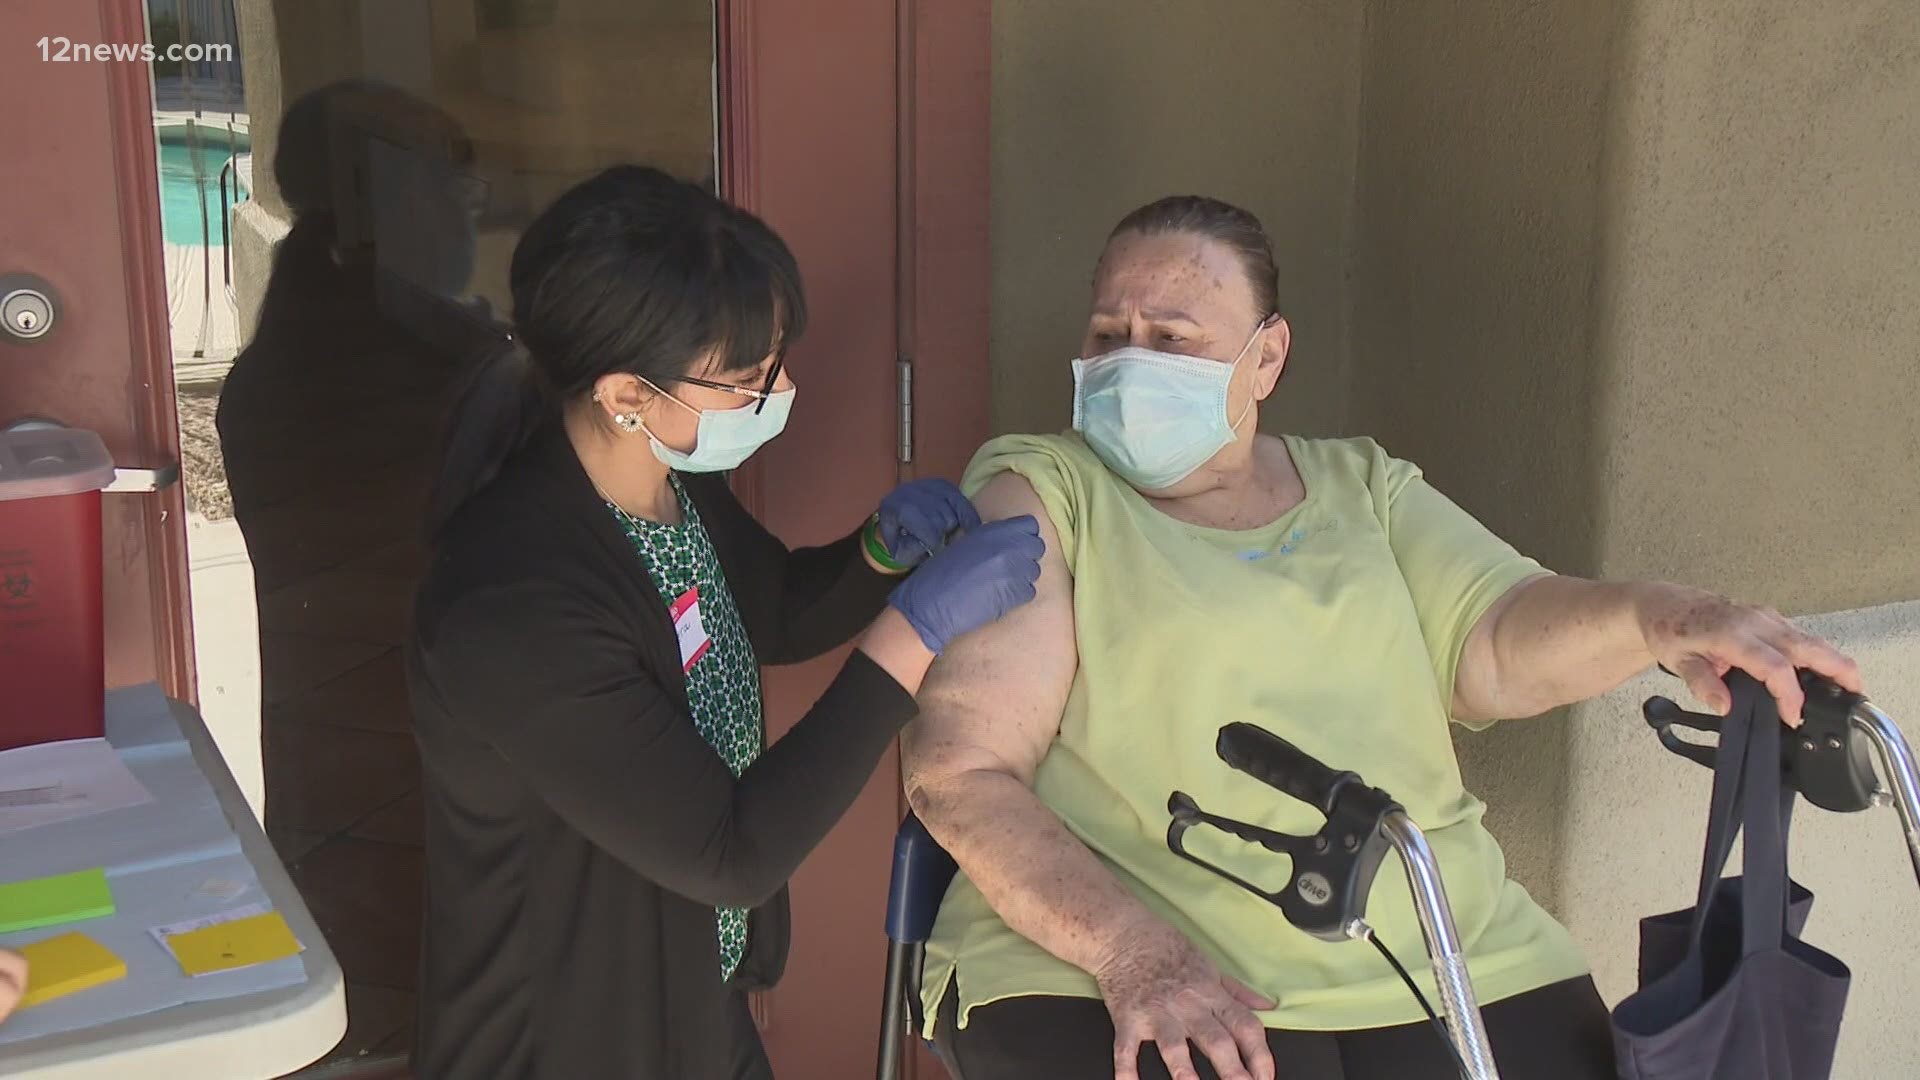 Maricopa County health officials are helping residents at the Fillmore Gardens Senior Housing Center in Phoenix get a COVID-19 vaccine.